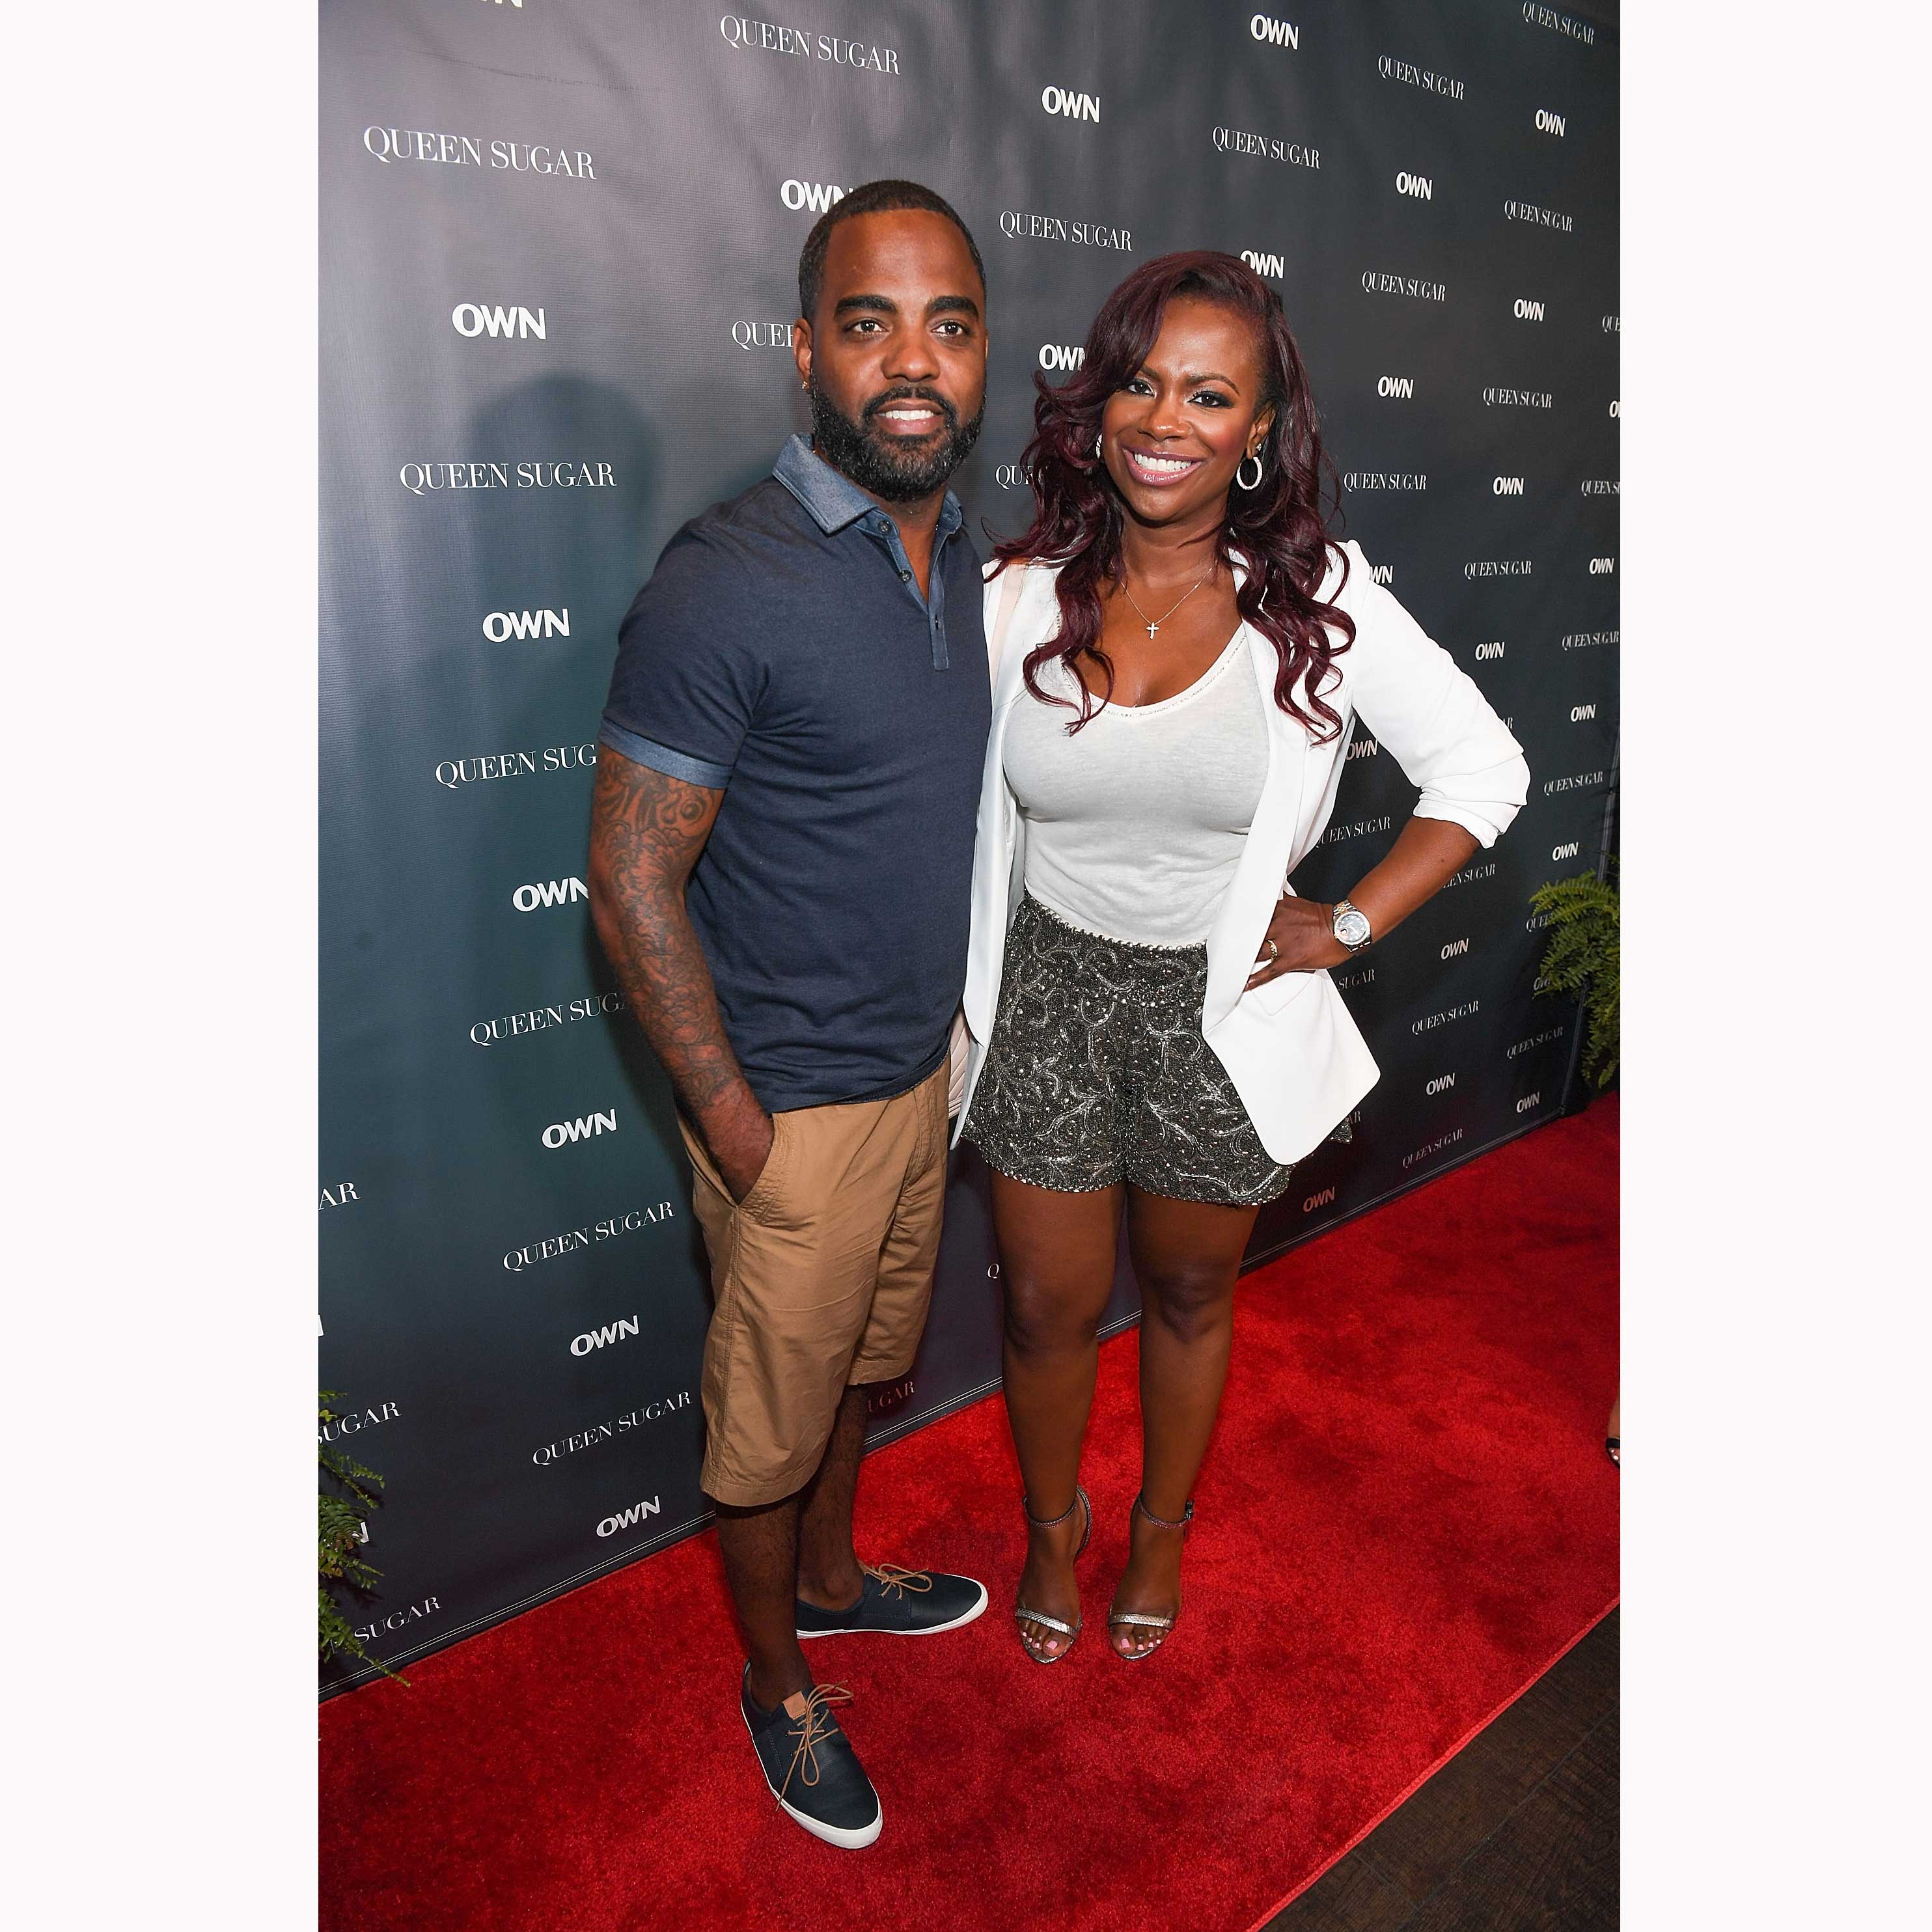 And The 4 Cutest Celebrity Couples At ESSENCE Festival Were...
